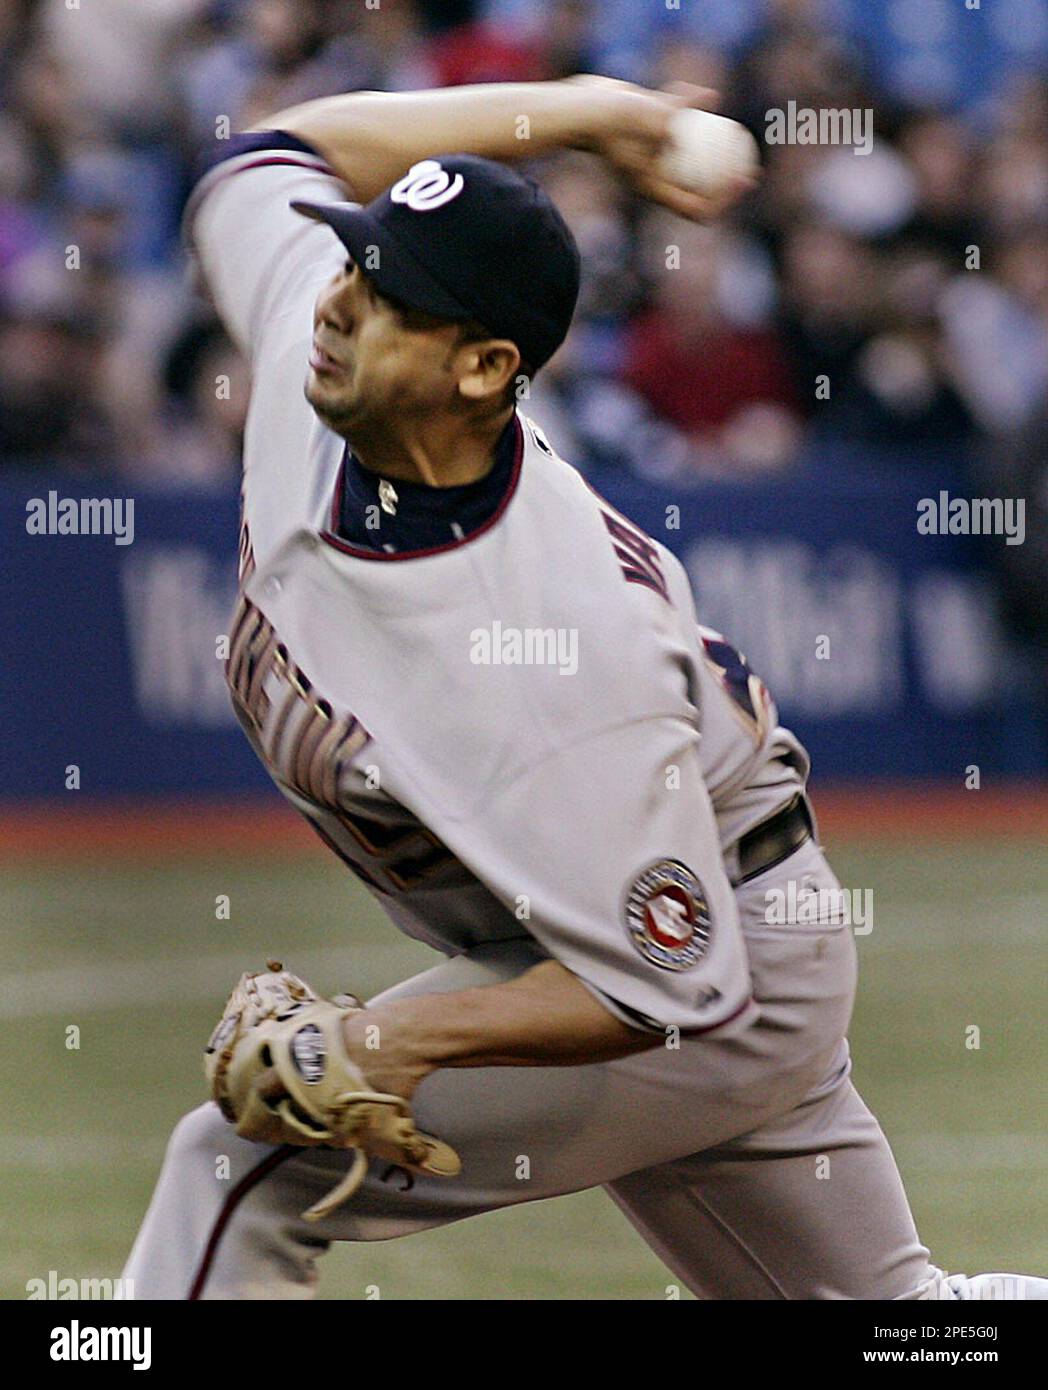 Washington Nationals starting pitcher Claudio Vargas makes a pitch as he  takes on the Toronto Blue Jays during third inning interleague action in  Toronto on Friday May 20, 2005. Friday marked the